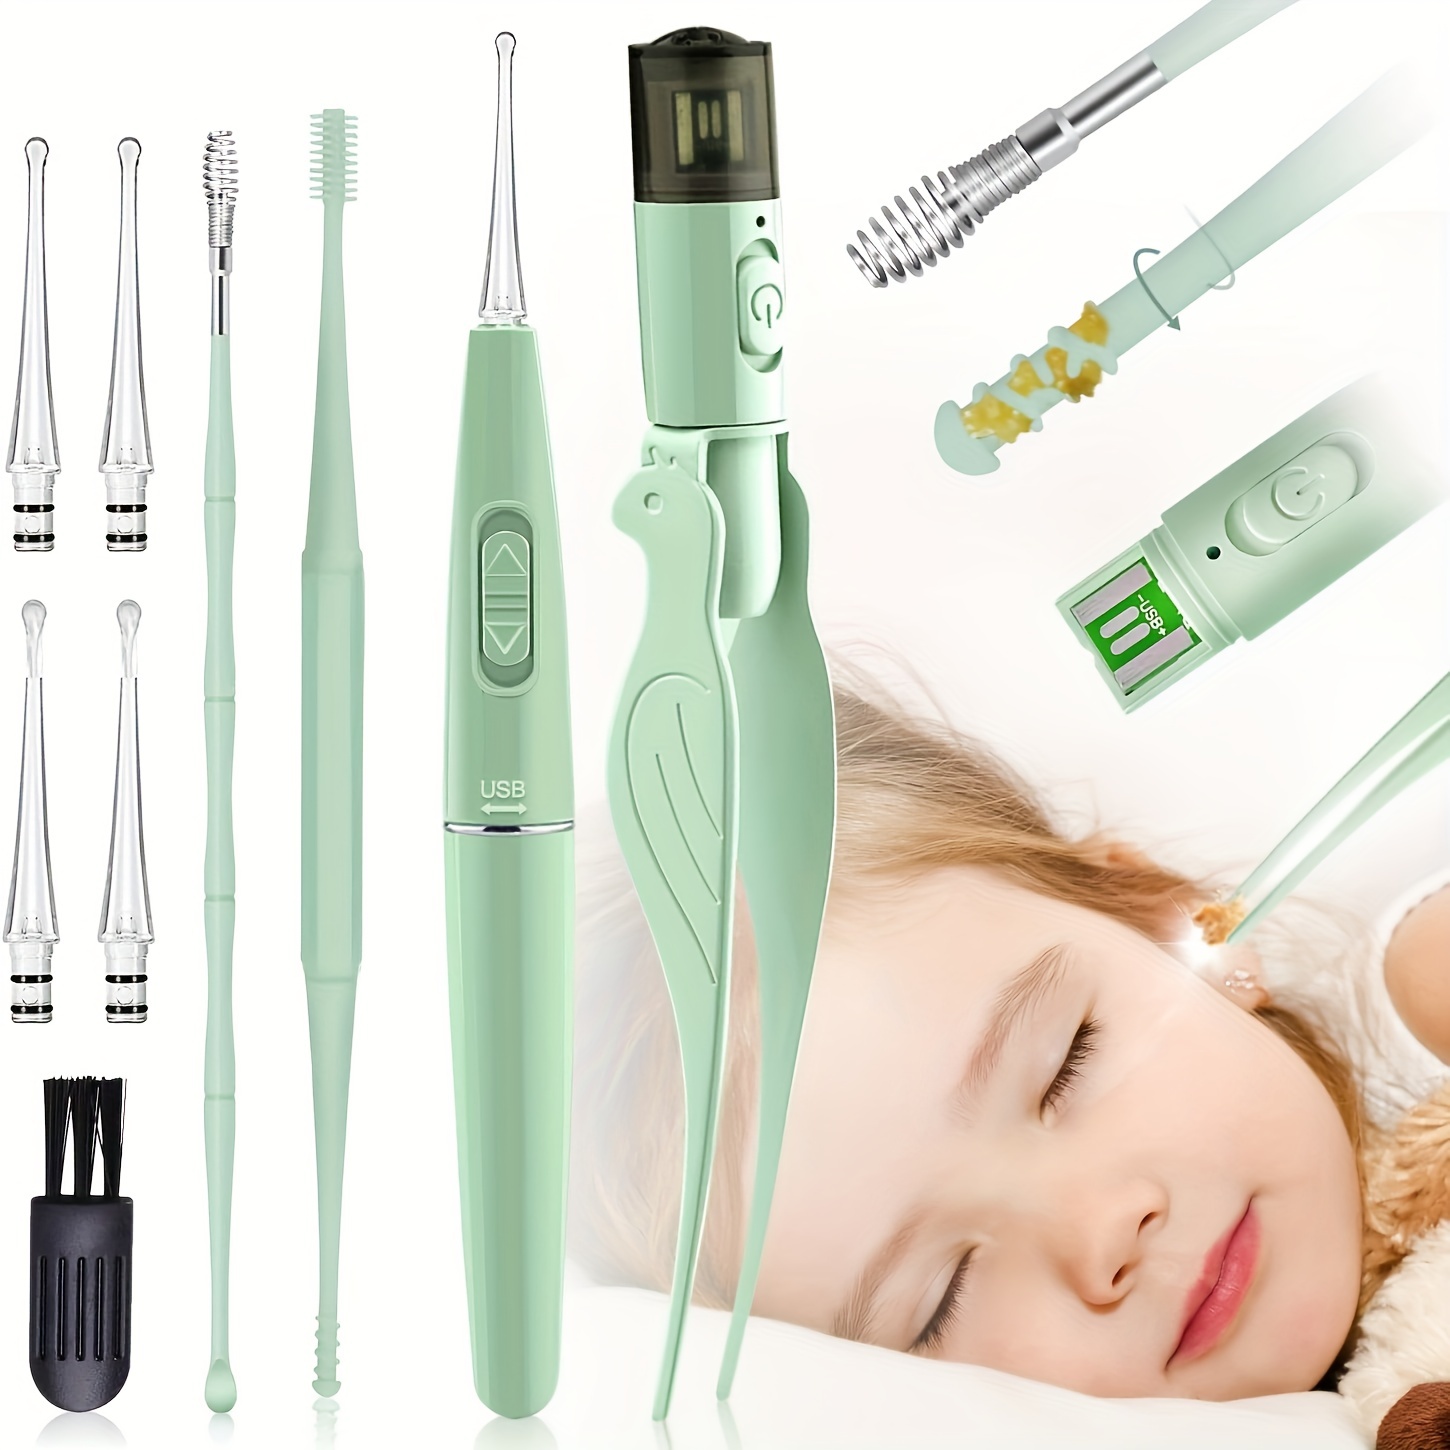 Ear Picking Spoon, Kids Ear Cleaner Ear Cleansing Tool Set - Visible Ear  Cleaner Earwax Removal Kit, Battery Powered/USB Charging Model